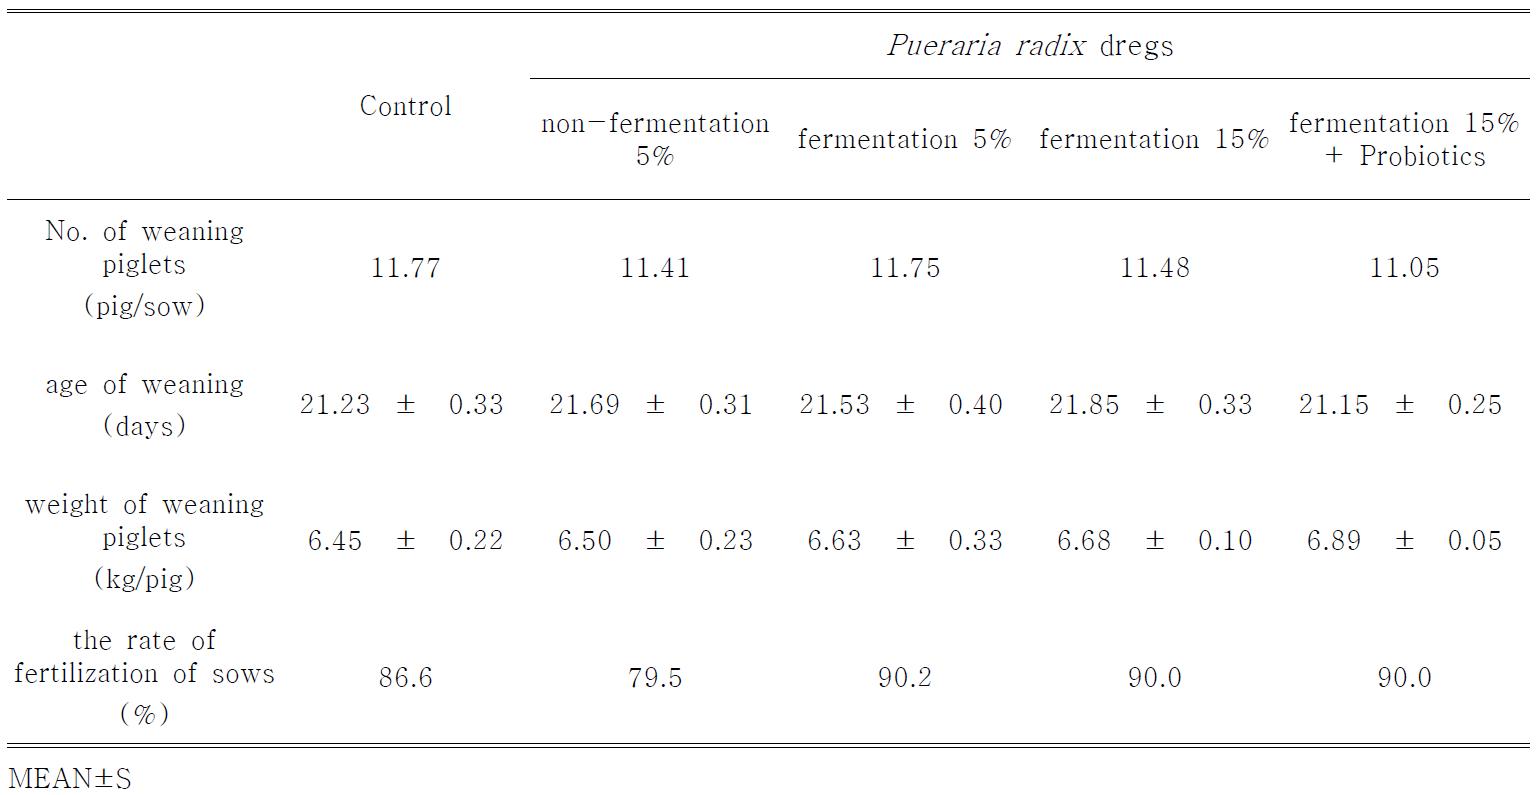 Effect of dietary supplementation of Pueraria radix dregs on the number of weaning piglets, weaning age of weaning, weight of weaning piglets and the rate of fertilization in sows